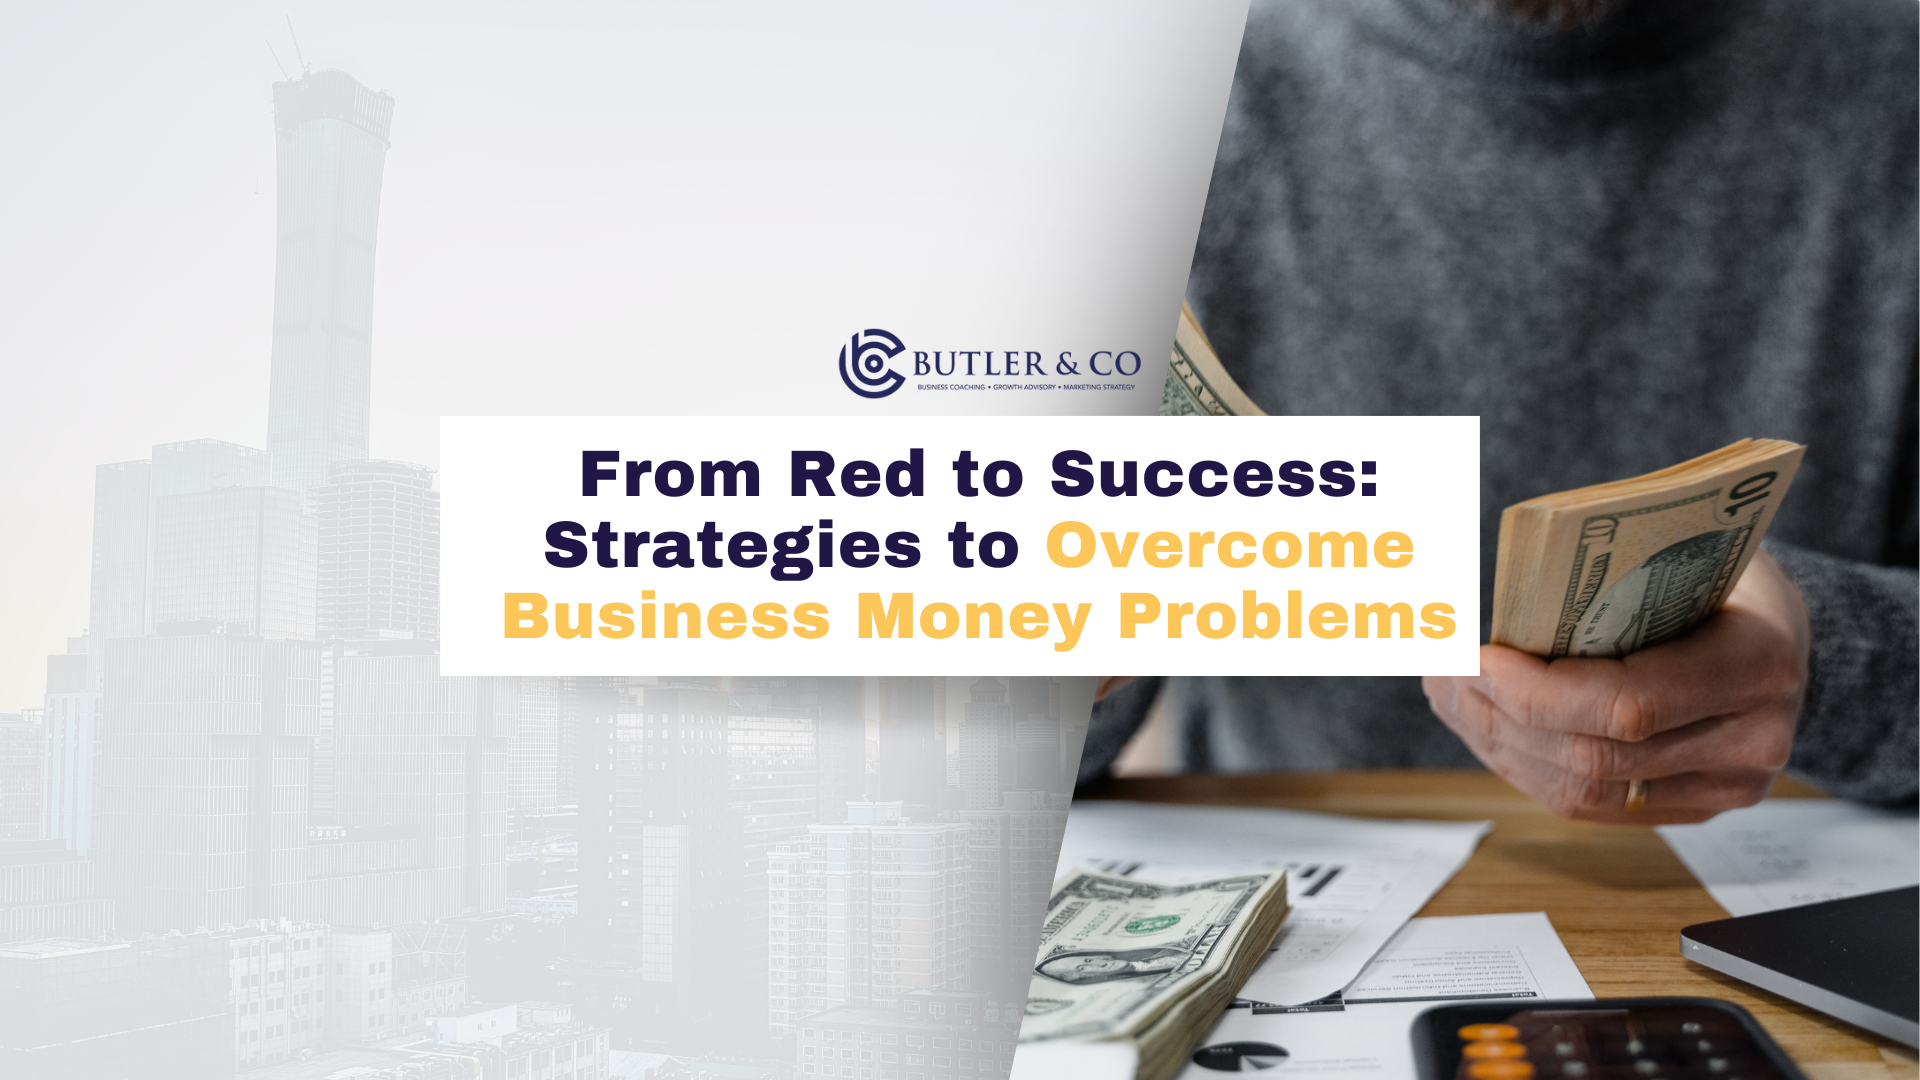 From Red to Success: Strategies to Overcome Business Money Problems